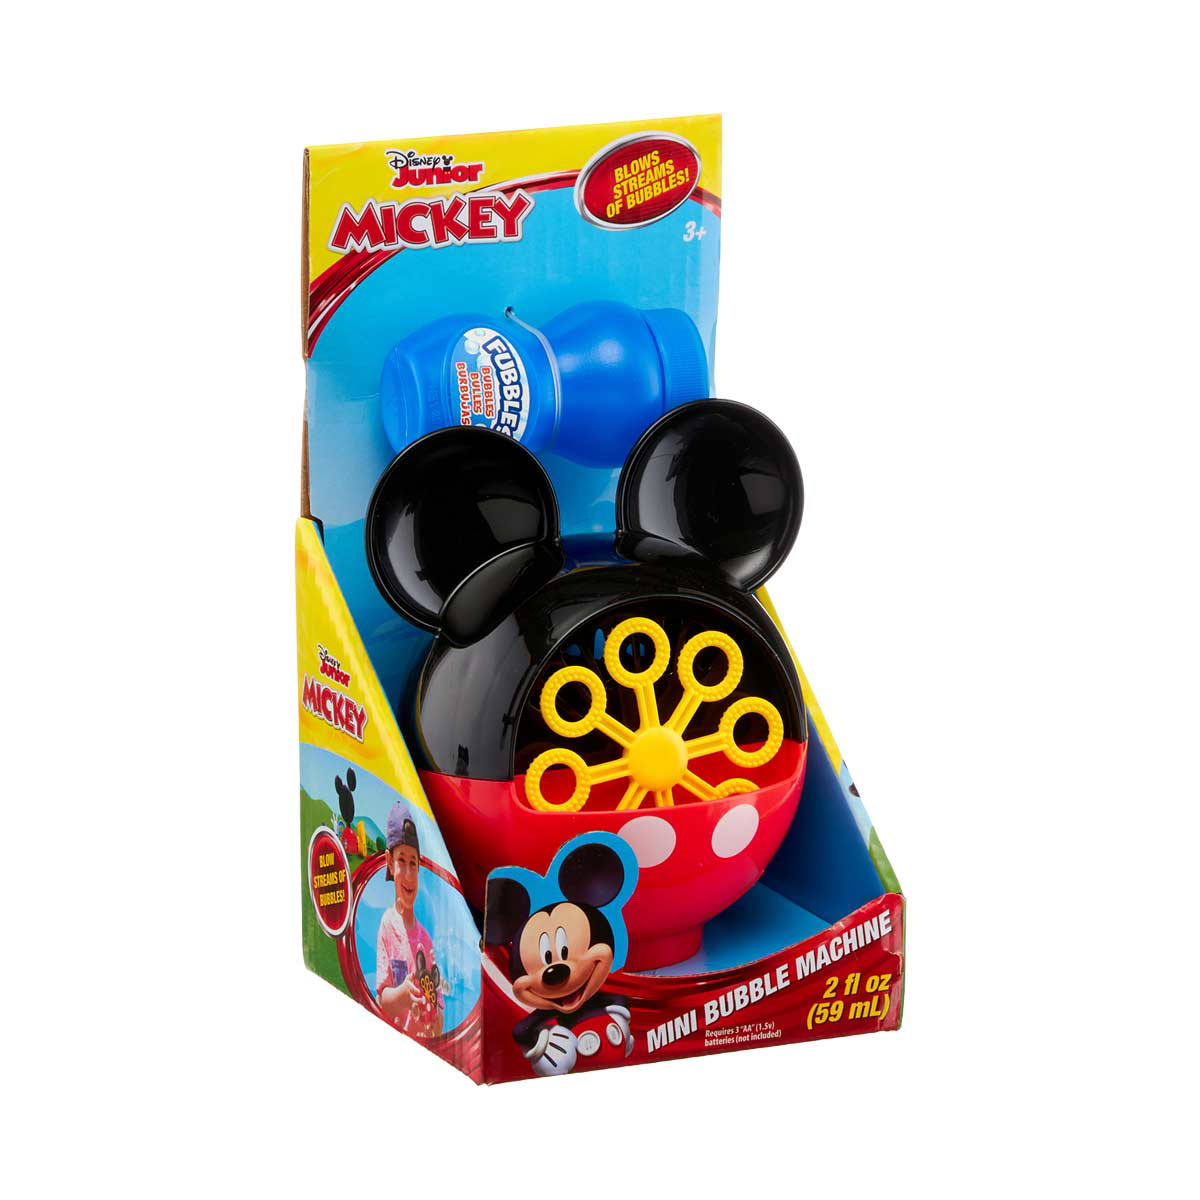 Disney Junior Mickey Mouse Mini Bubble Machine Battery Op Toy Ages